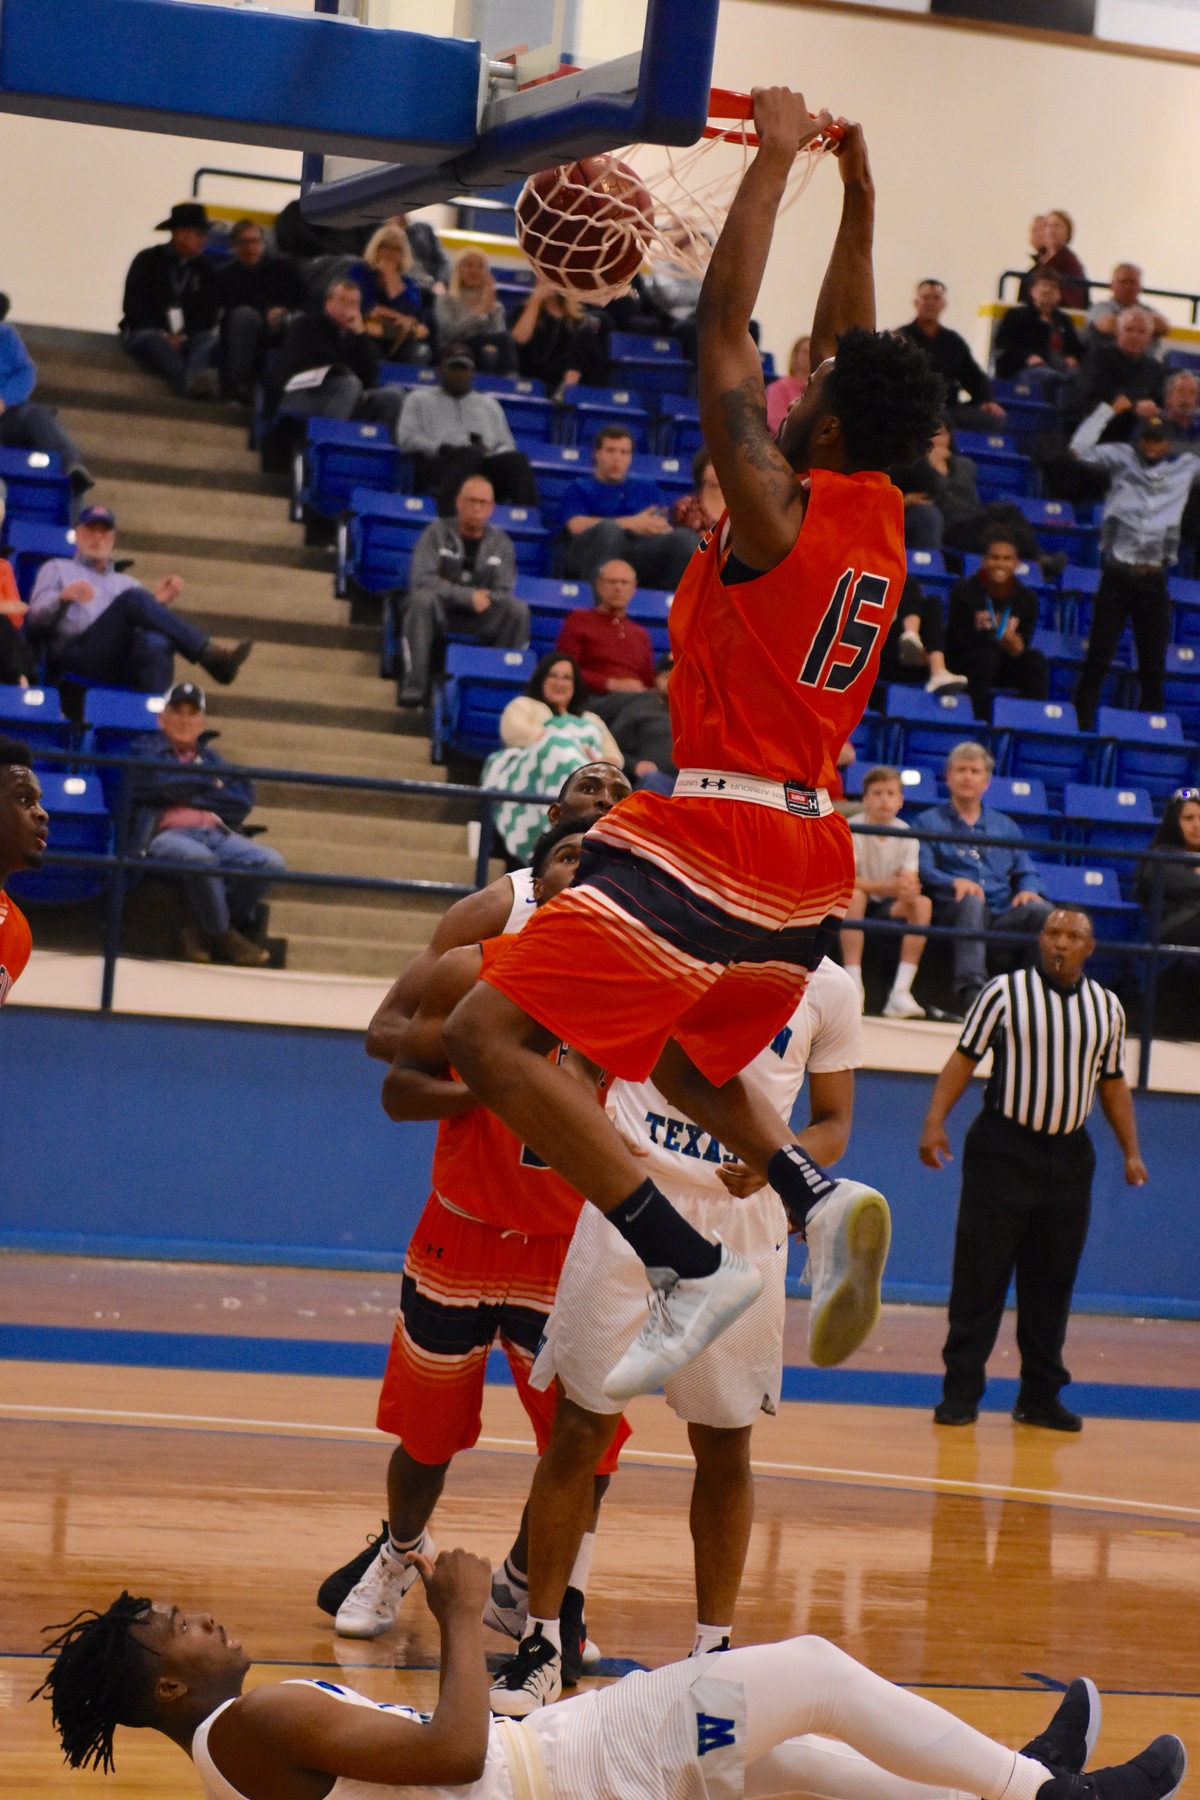 Texans fall to Western Texas 82-74 in semifinal round of Region V Tournament on Friday